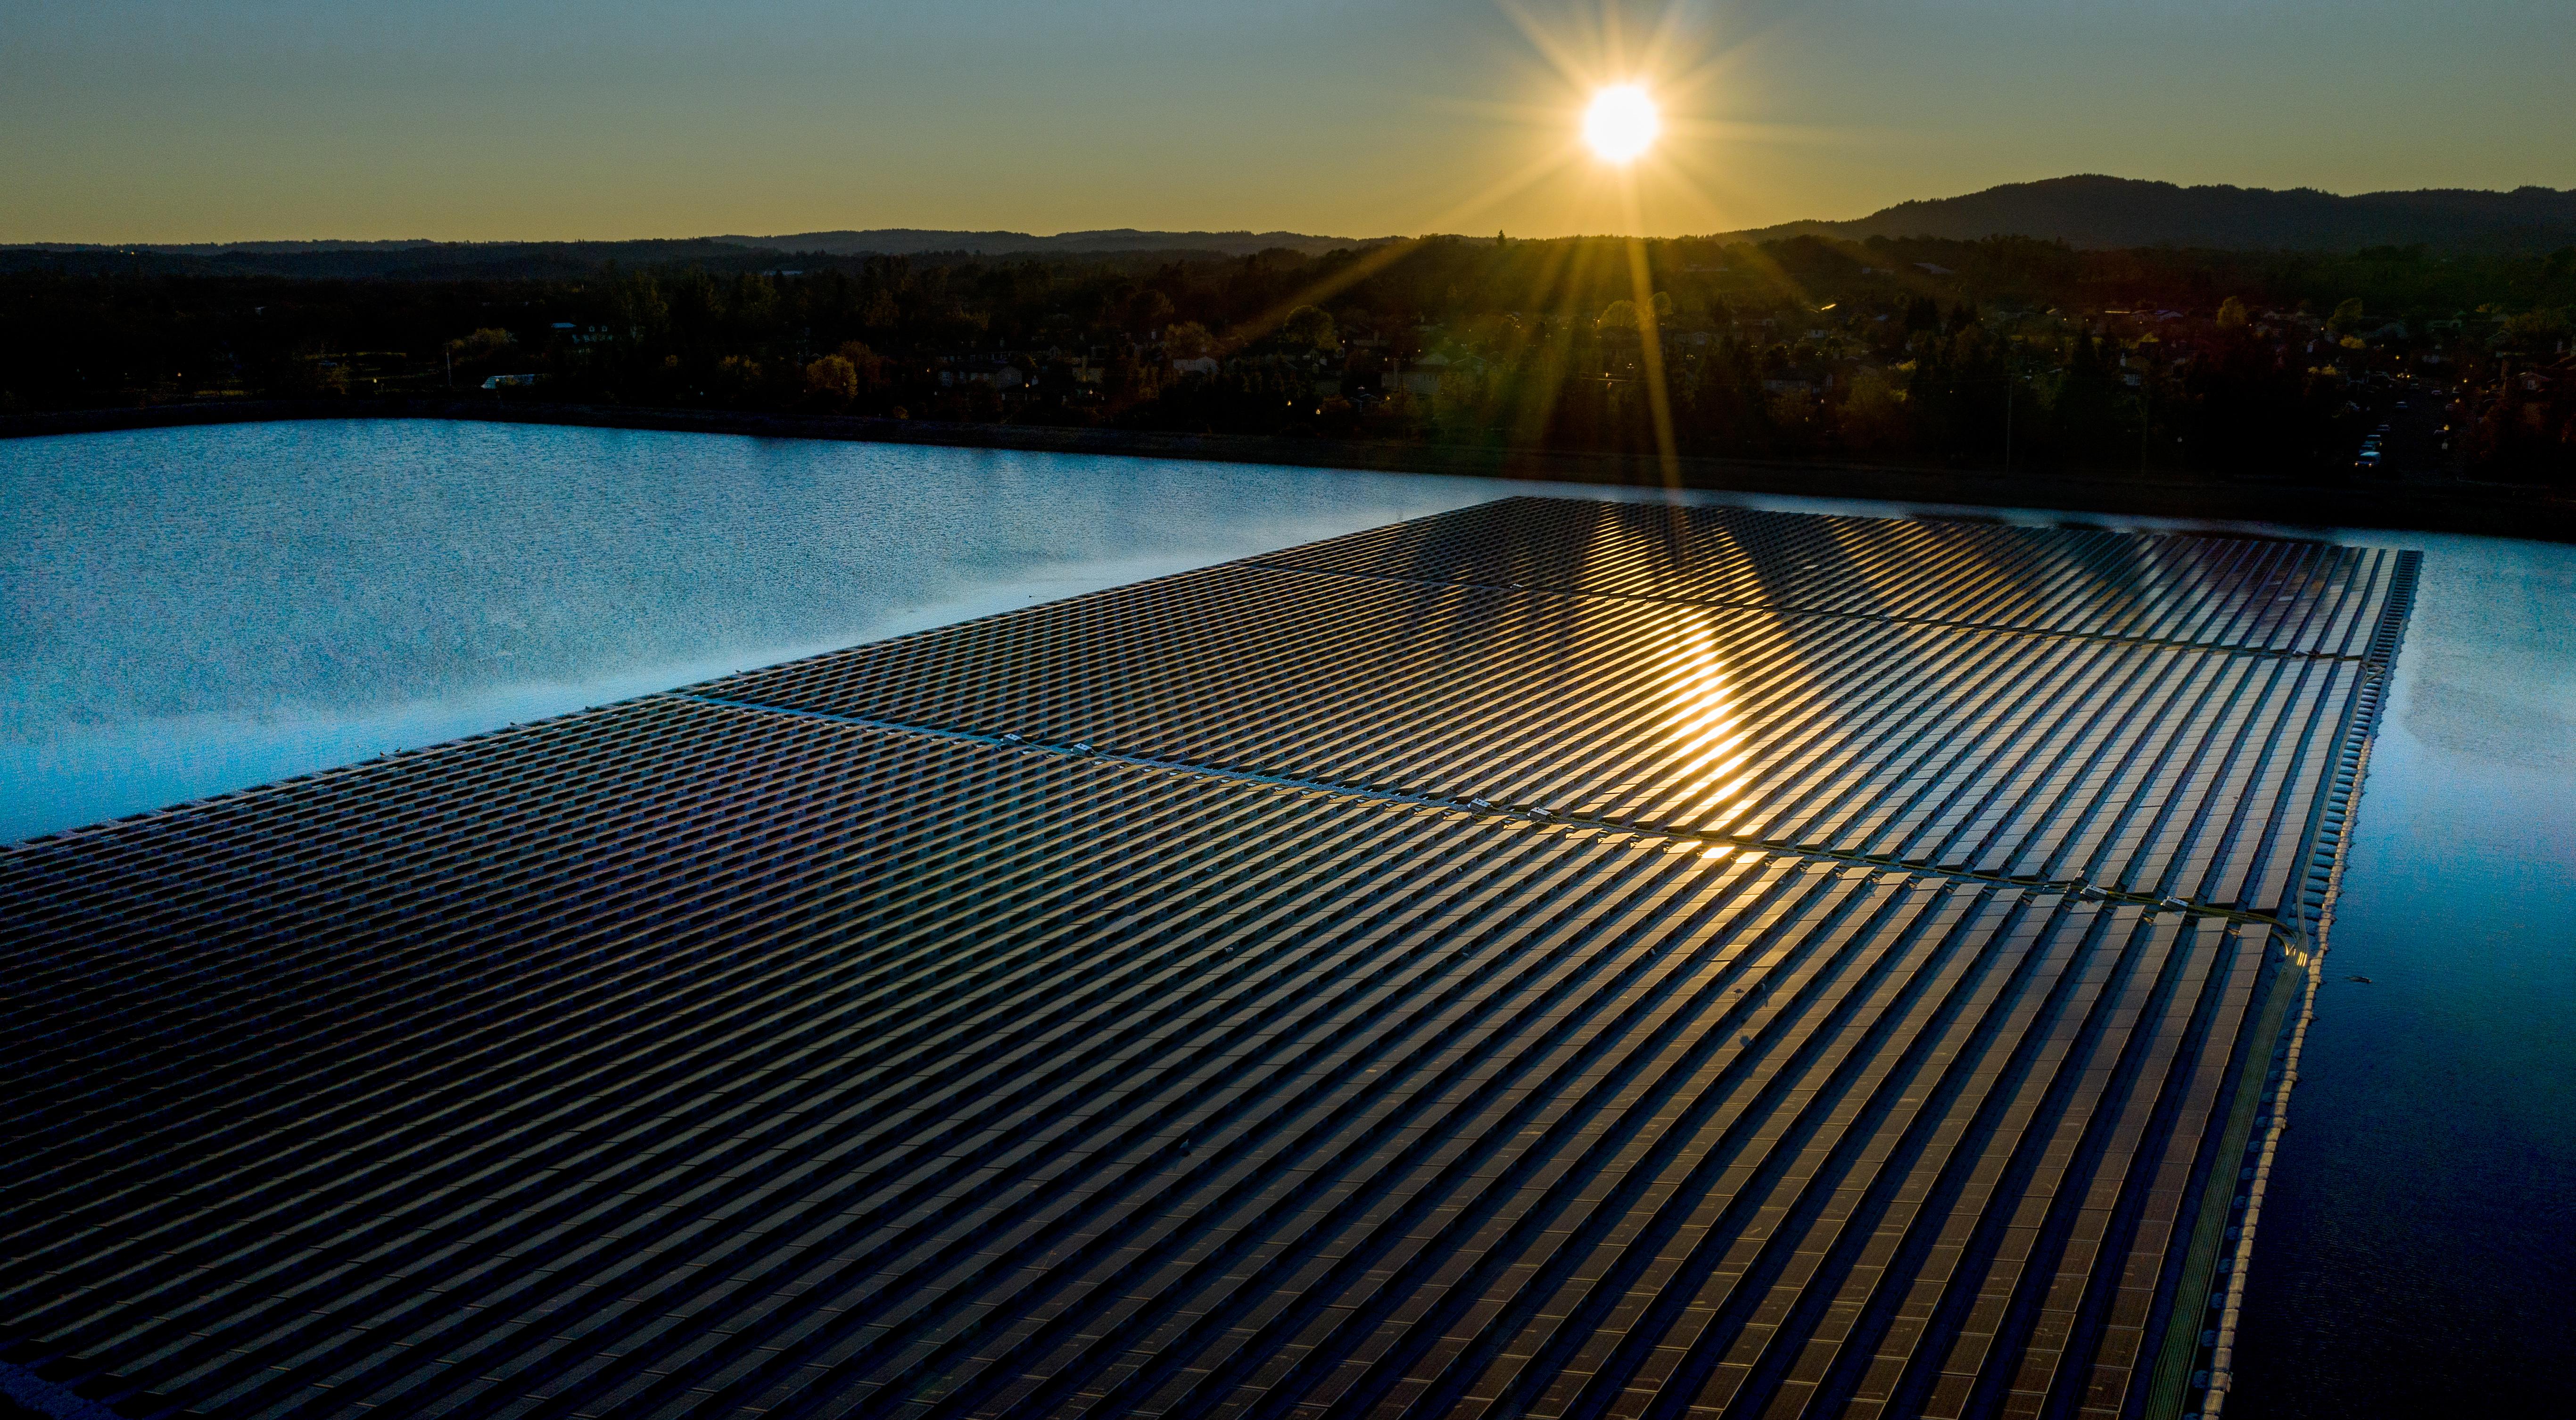 Floating solar panels in the Town of Windsor, Calif., installed by Ciel et Terre, during a sunrise.